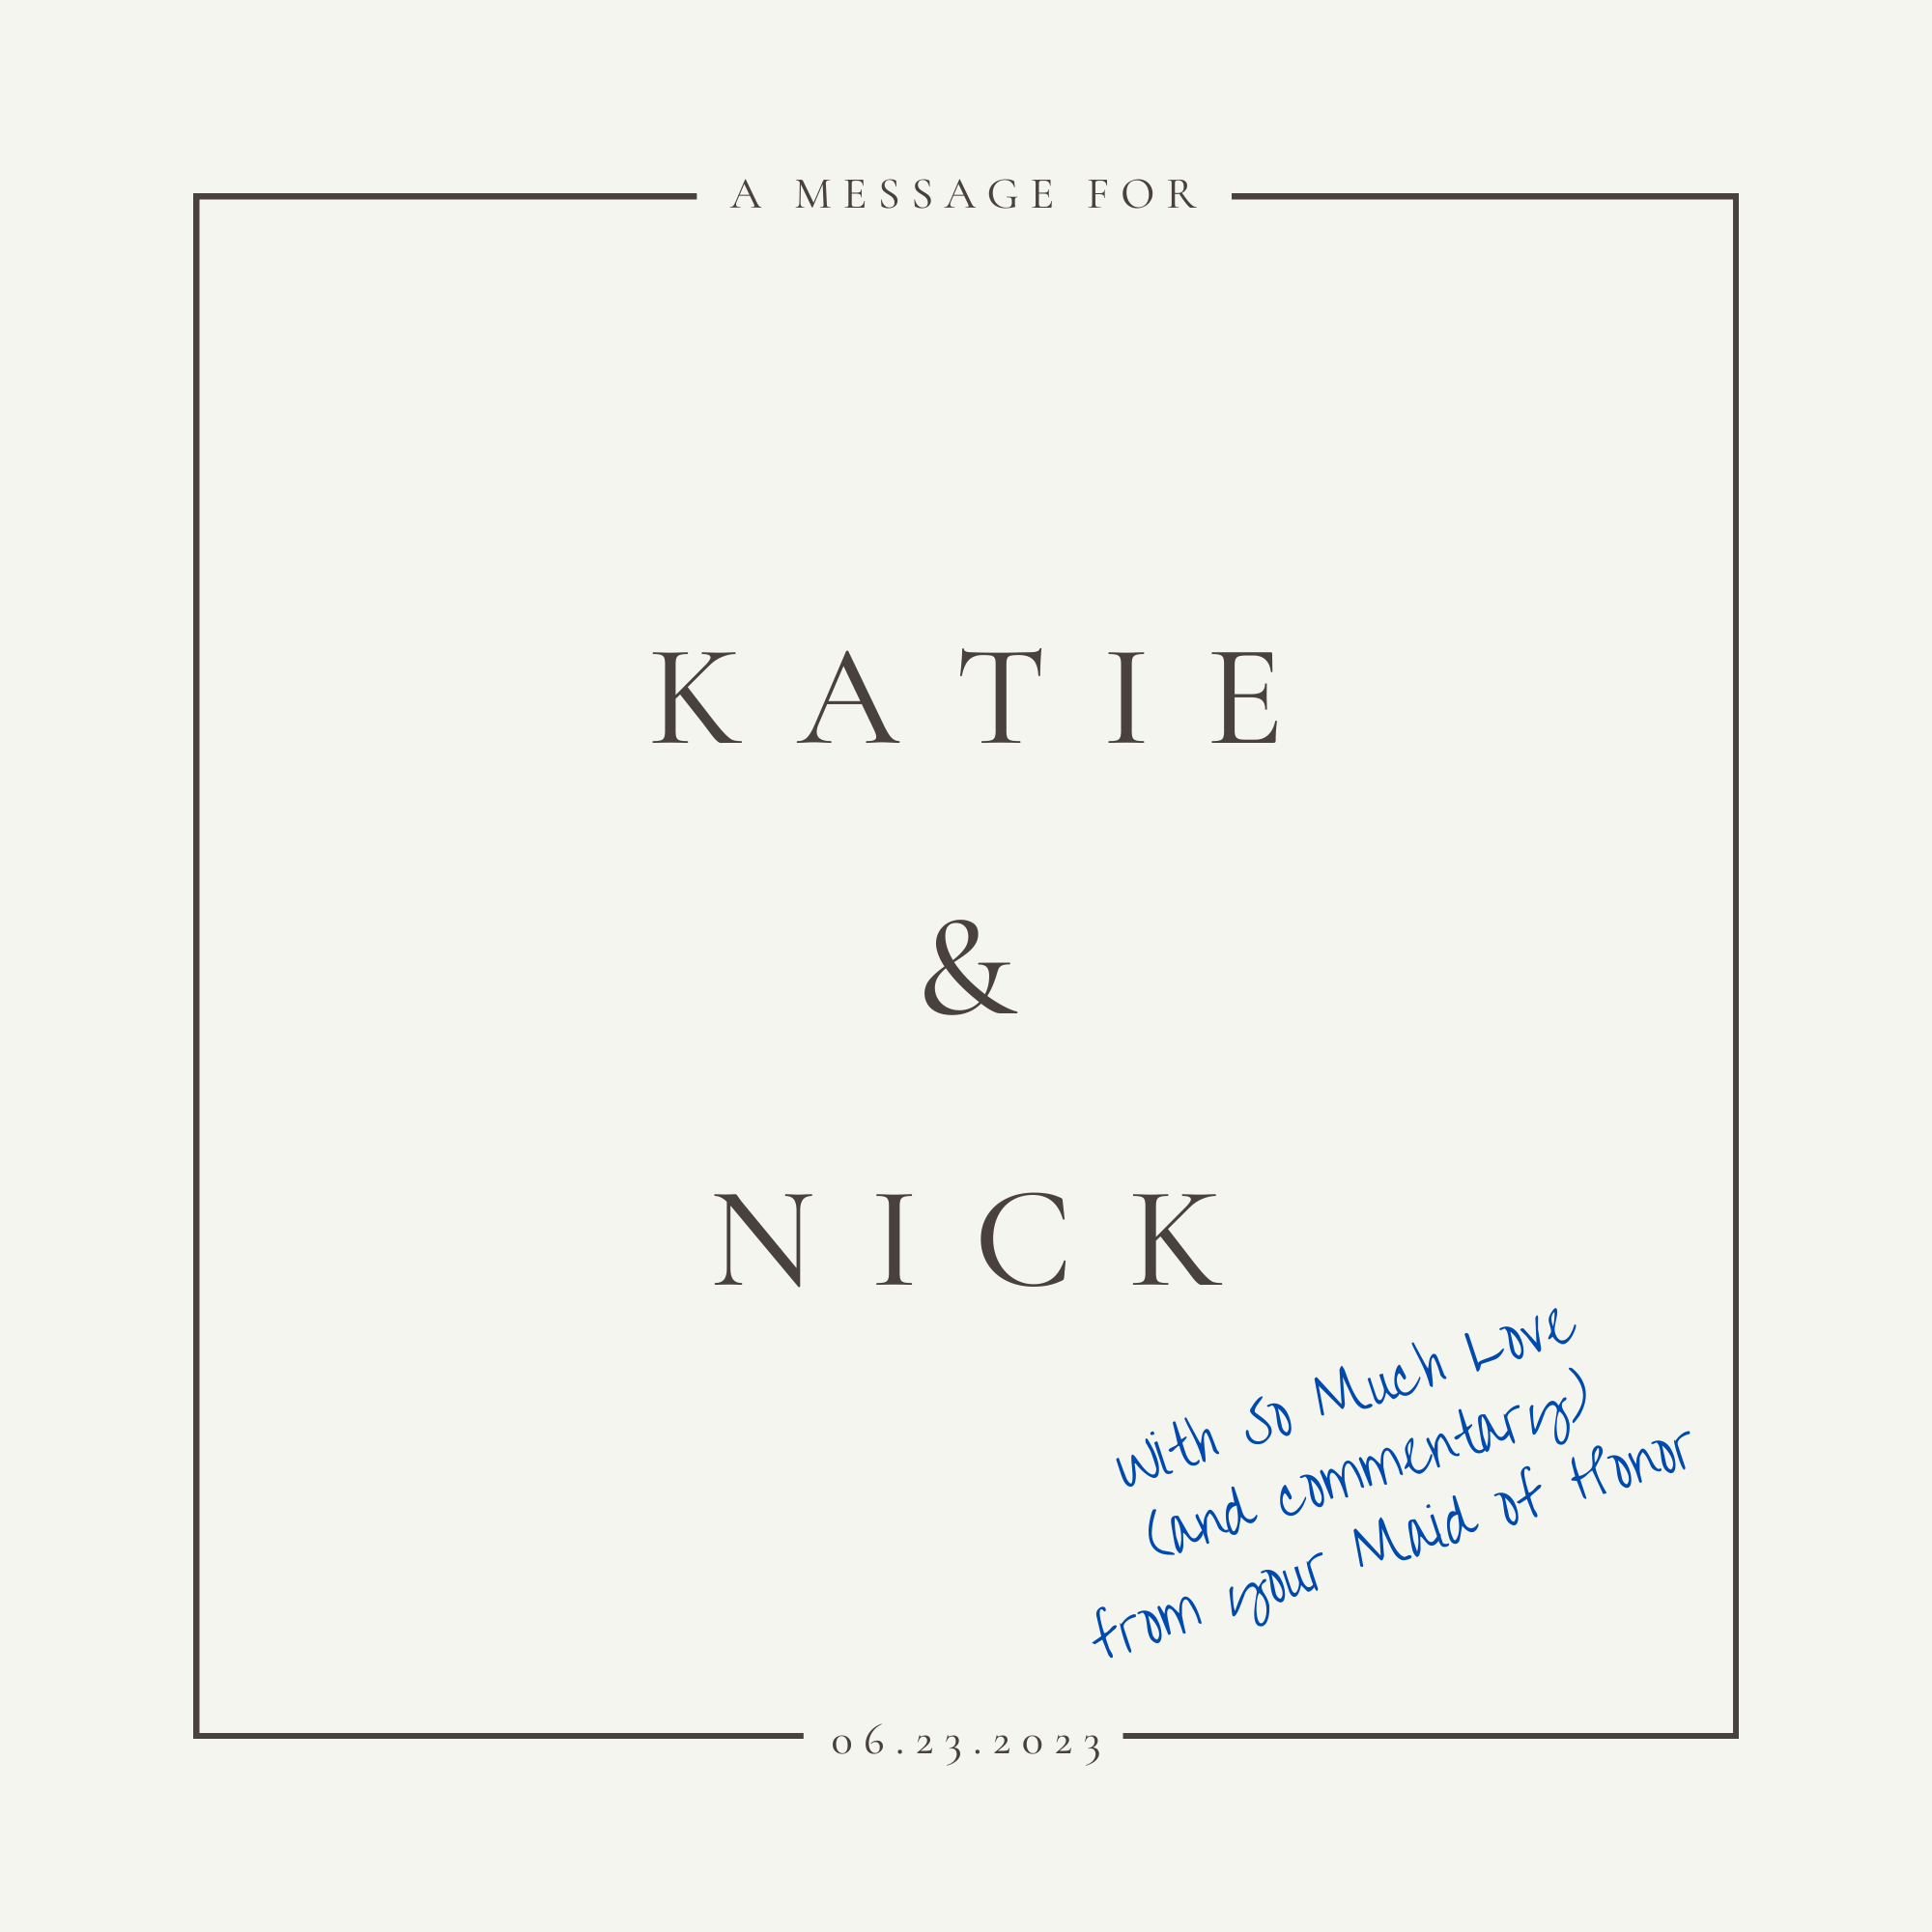 A Message for Katie & Nick (2023) 

This was a short book created for Katie & Nick as a wedding gift. It contained the speech the Maid of Honor had written and presented to Katie & Nick at their wedding. It also contained photos that were taken of them throughout their relationship.